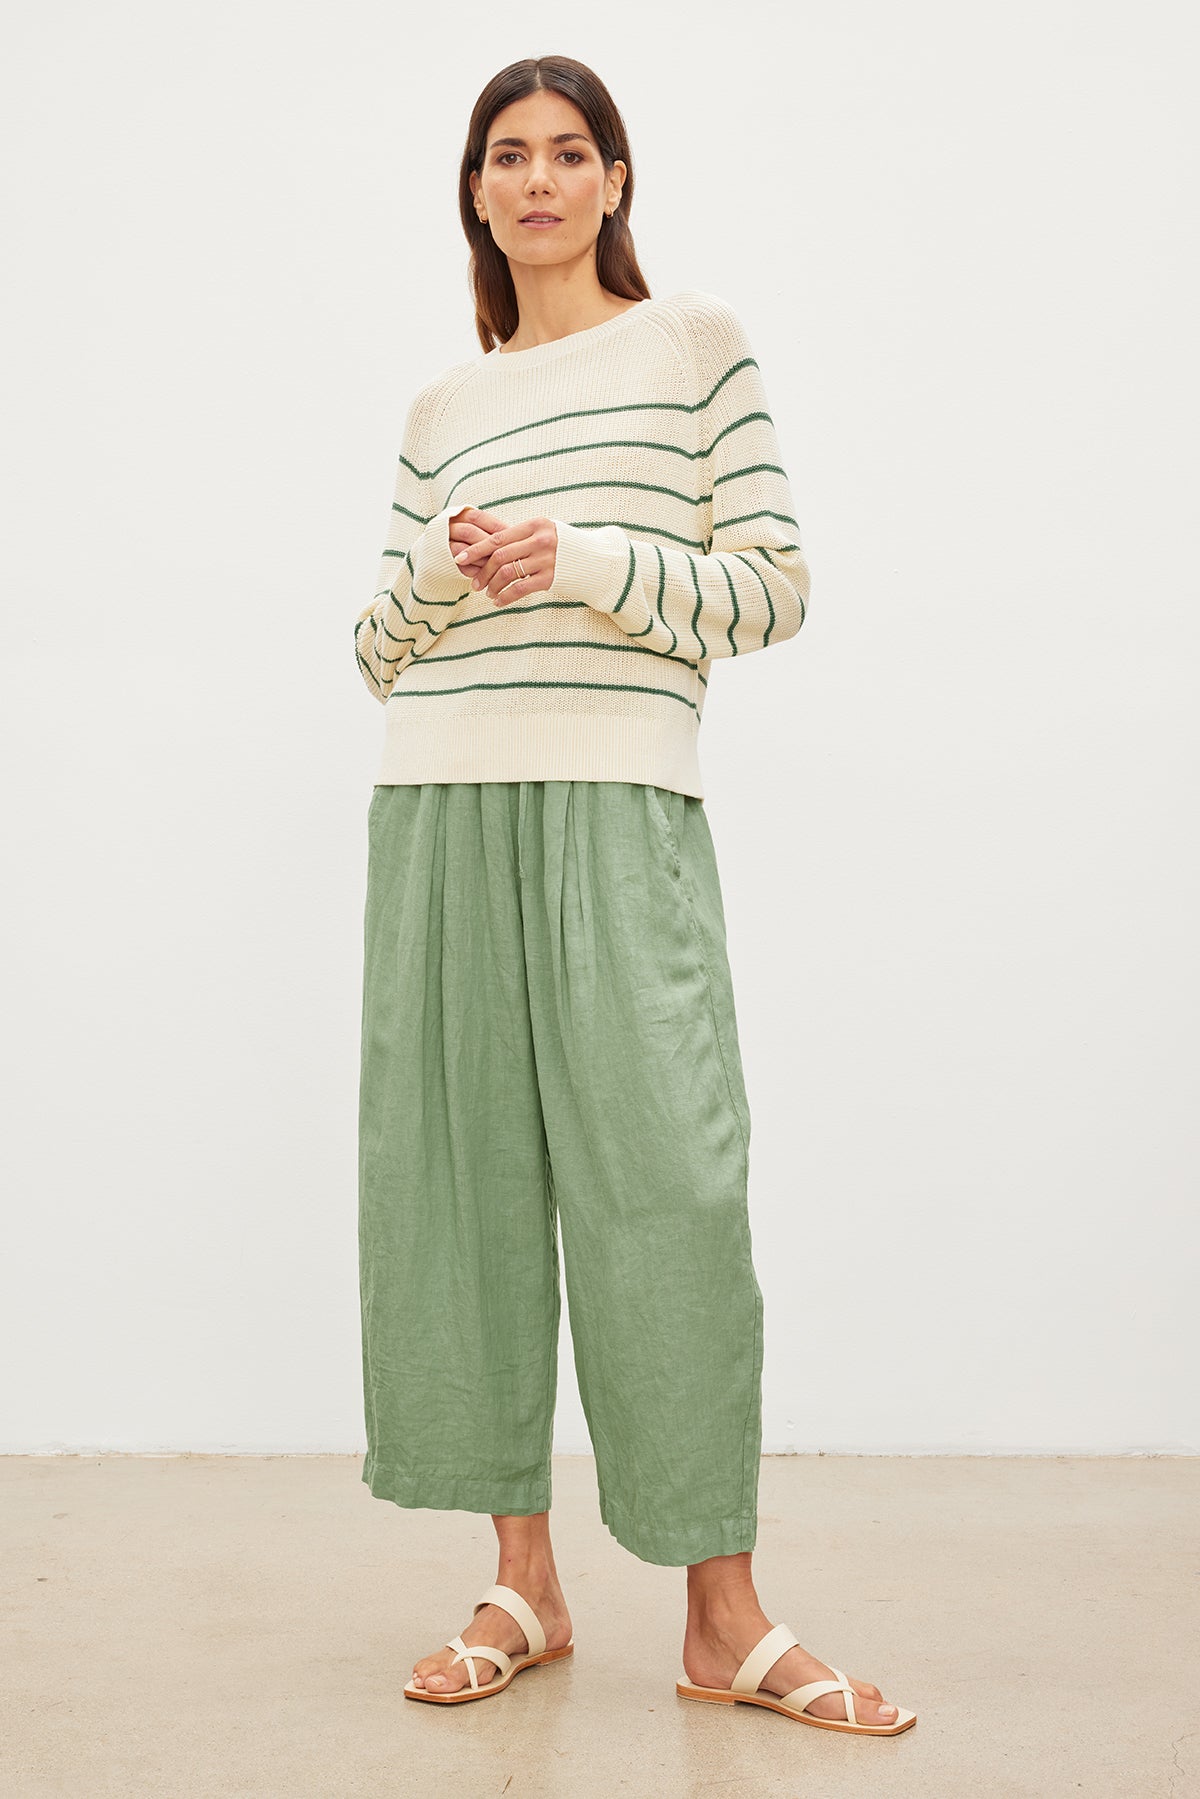   The model is wearing a CHAYSE STRIPED CREW NECK SWEATER by Velvet by Graham & Spencer in a relaxed silhouette and textured cotton culottes. 